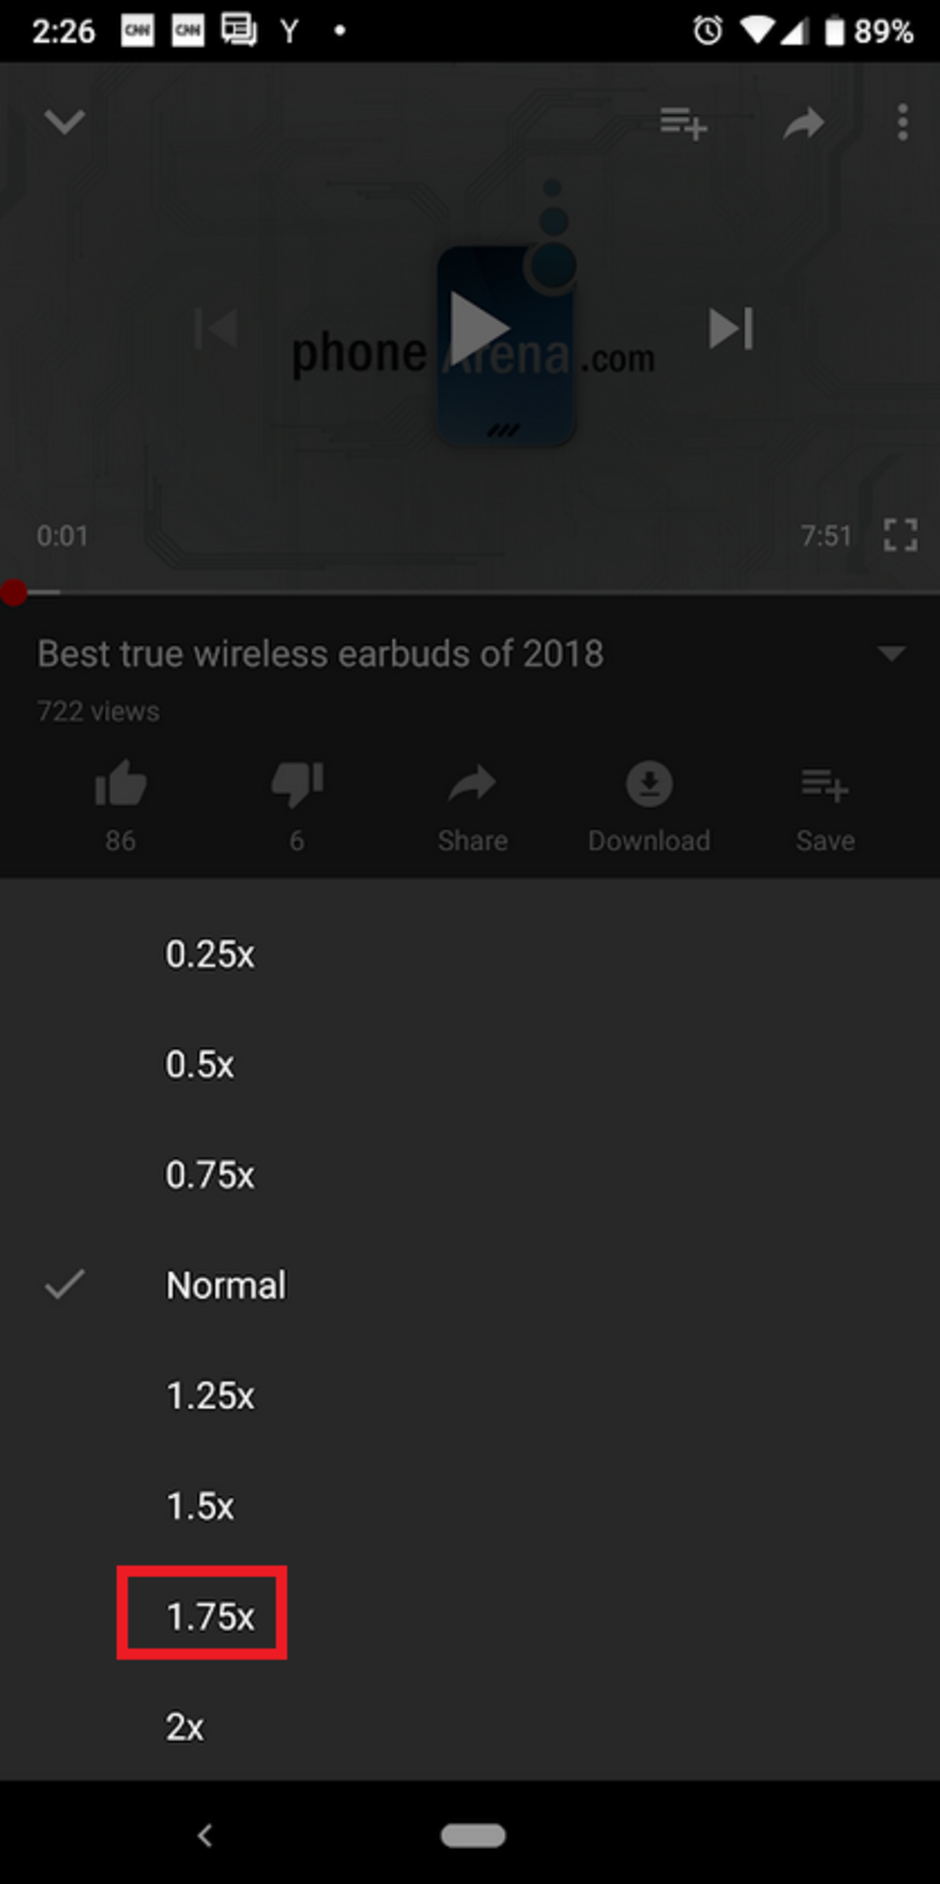 YouTube's Android app now offers playback speed at 1.75x normal - Google adds 1.75X playback speed option to the Android version of the YouTube app